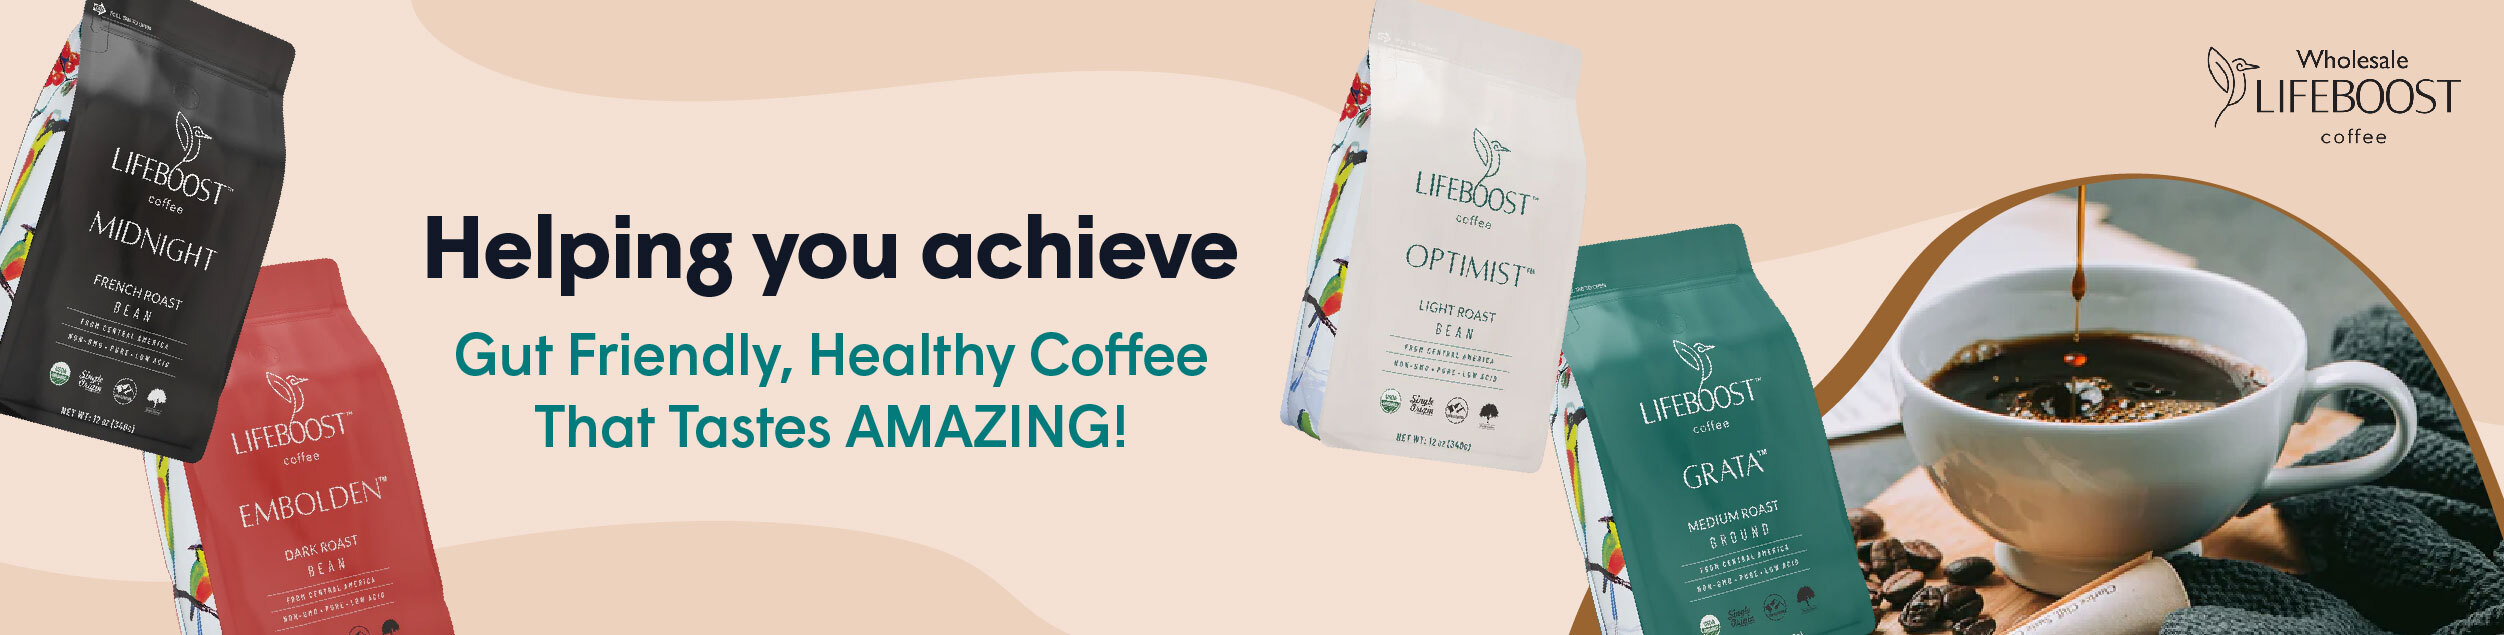 Lifeboost Coffee banner 1202x305px 01